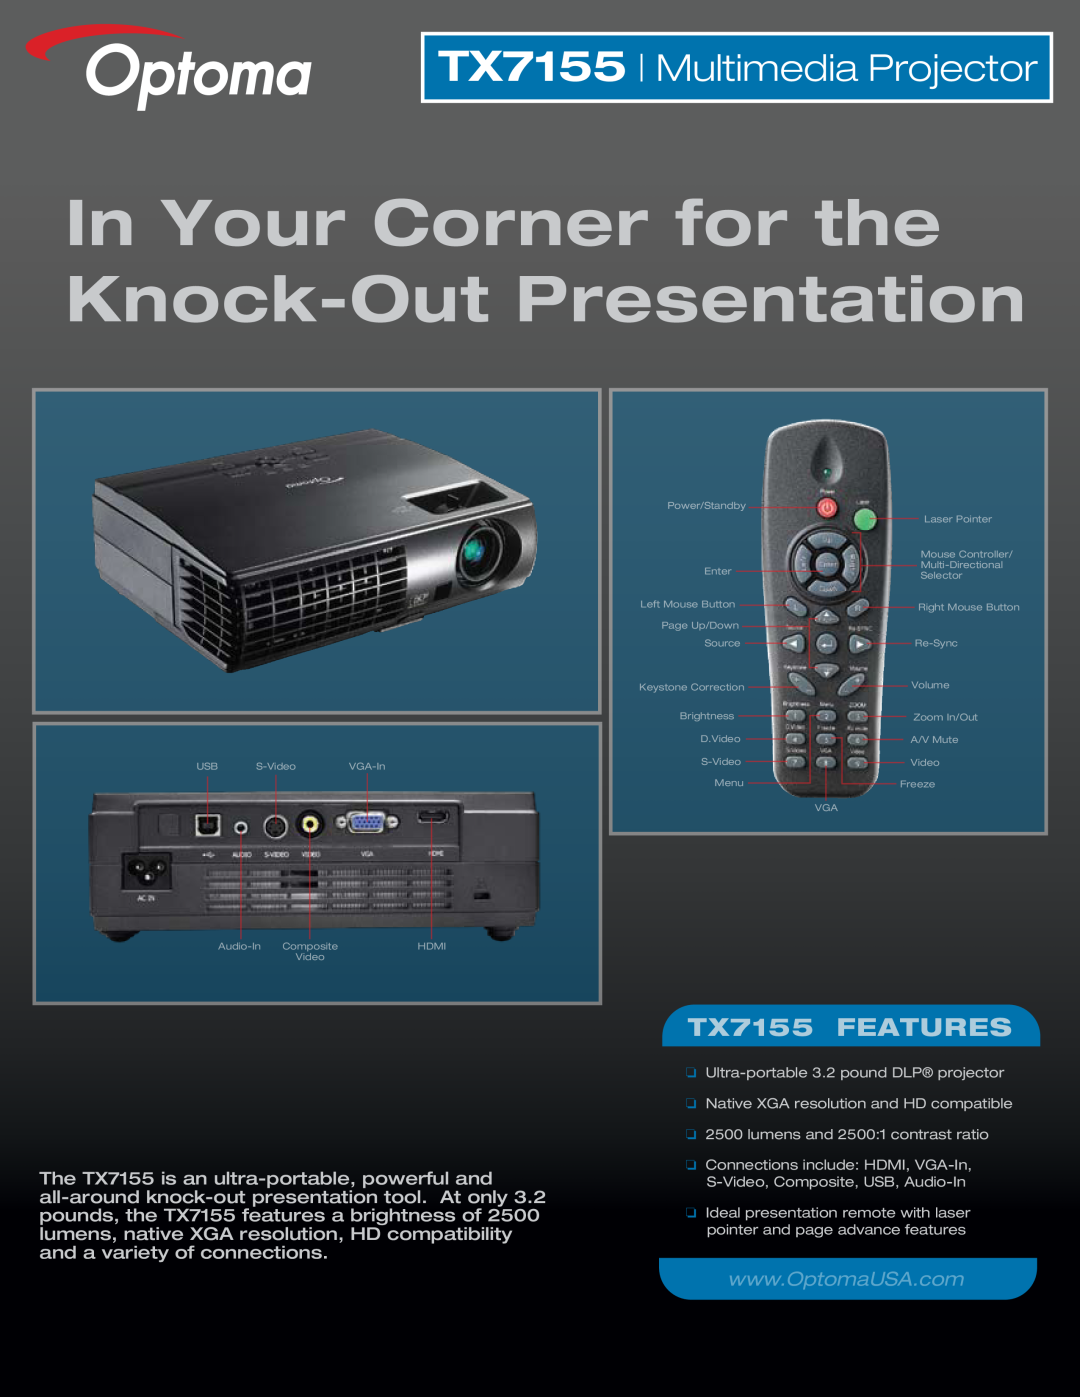 Optoma Technology manual TX7155 Multimedia Projector, In Your Corner for the Knock-Out Presentation, TX7155 FEATURES 